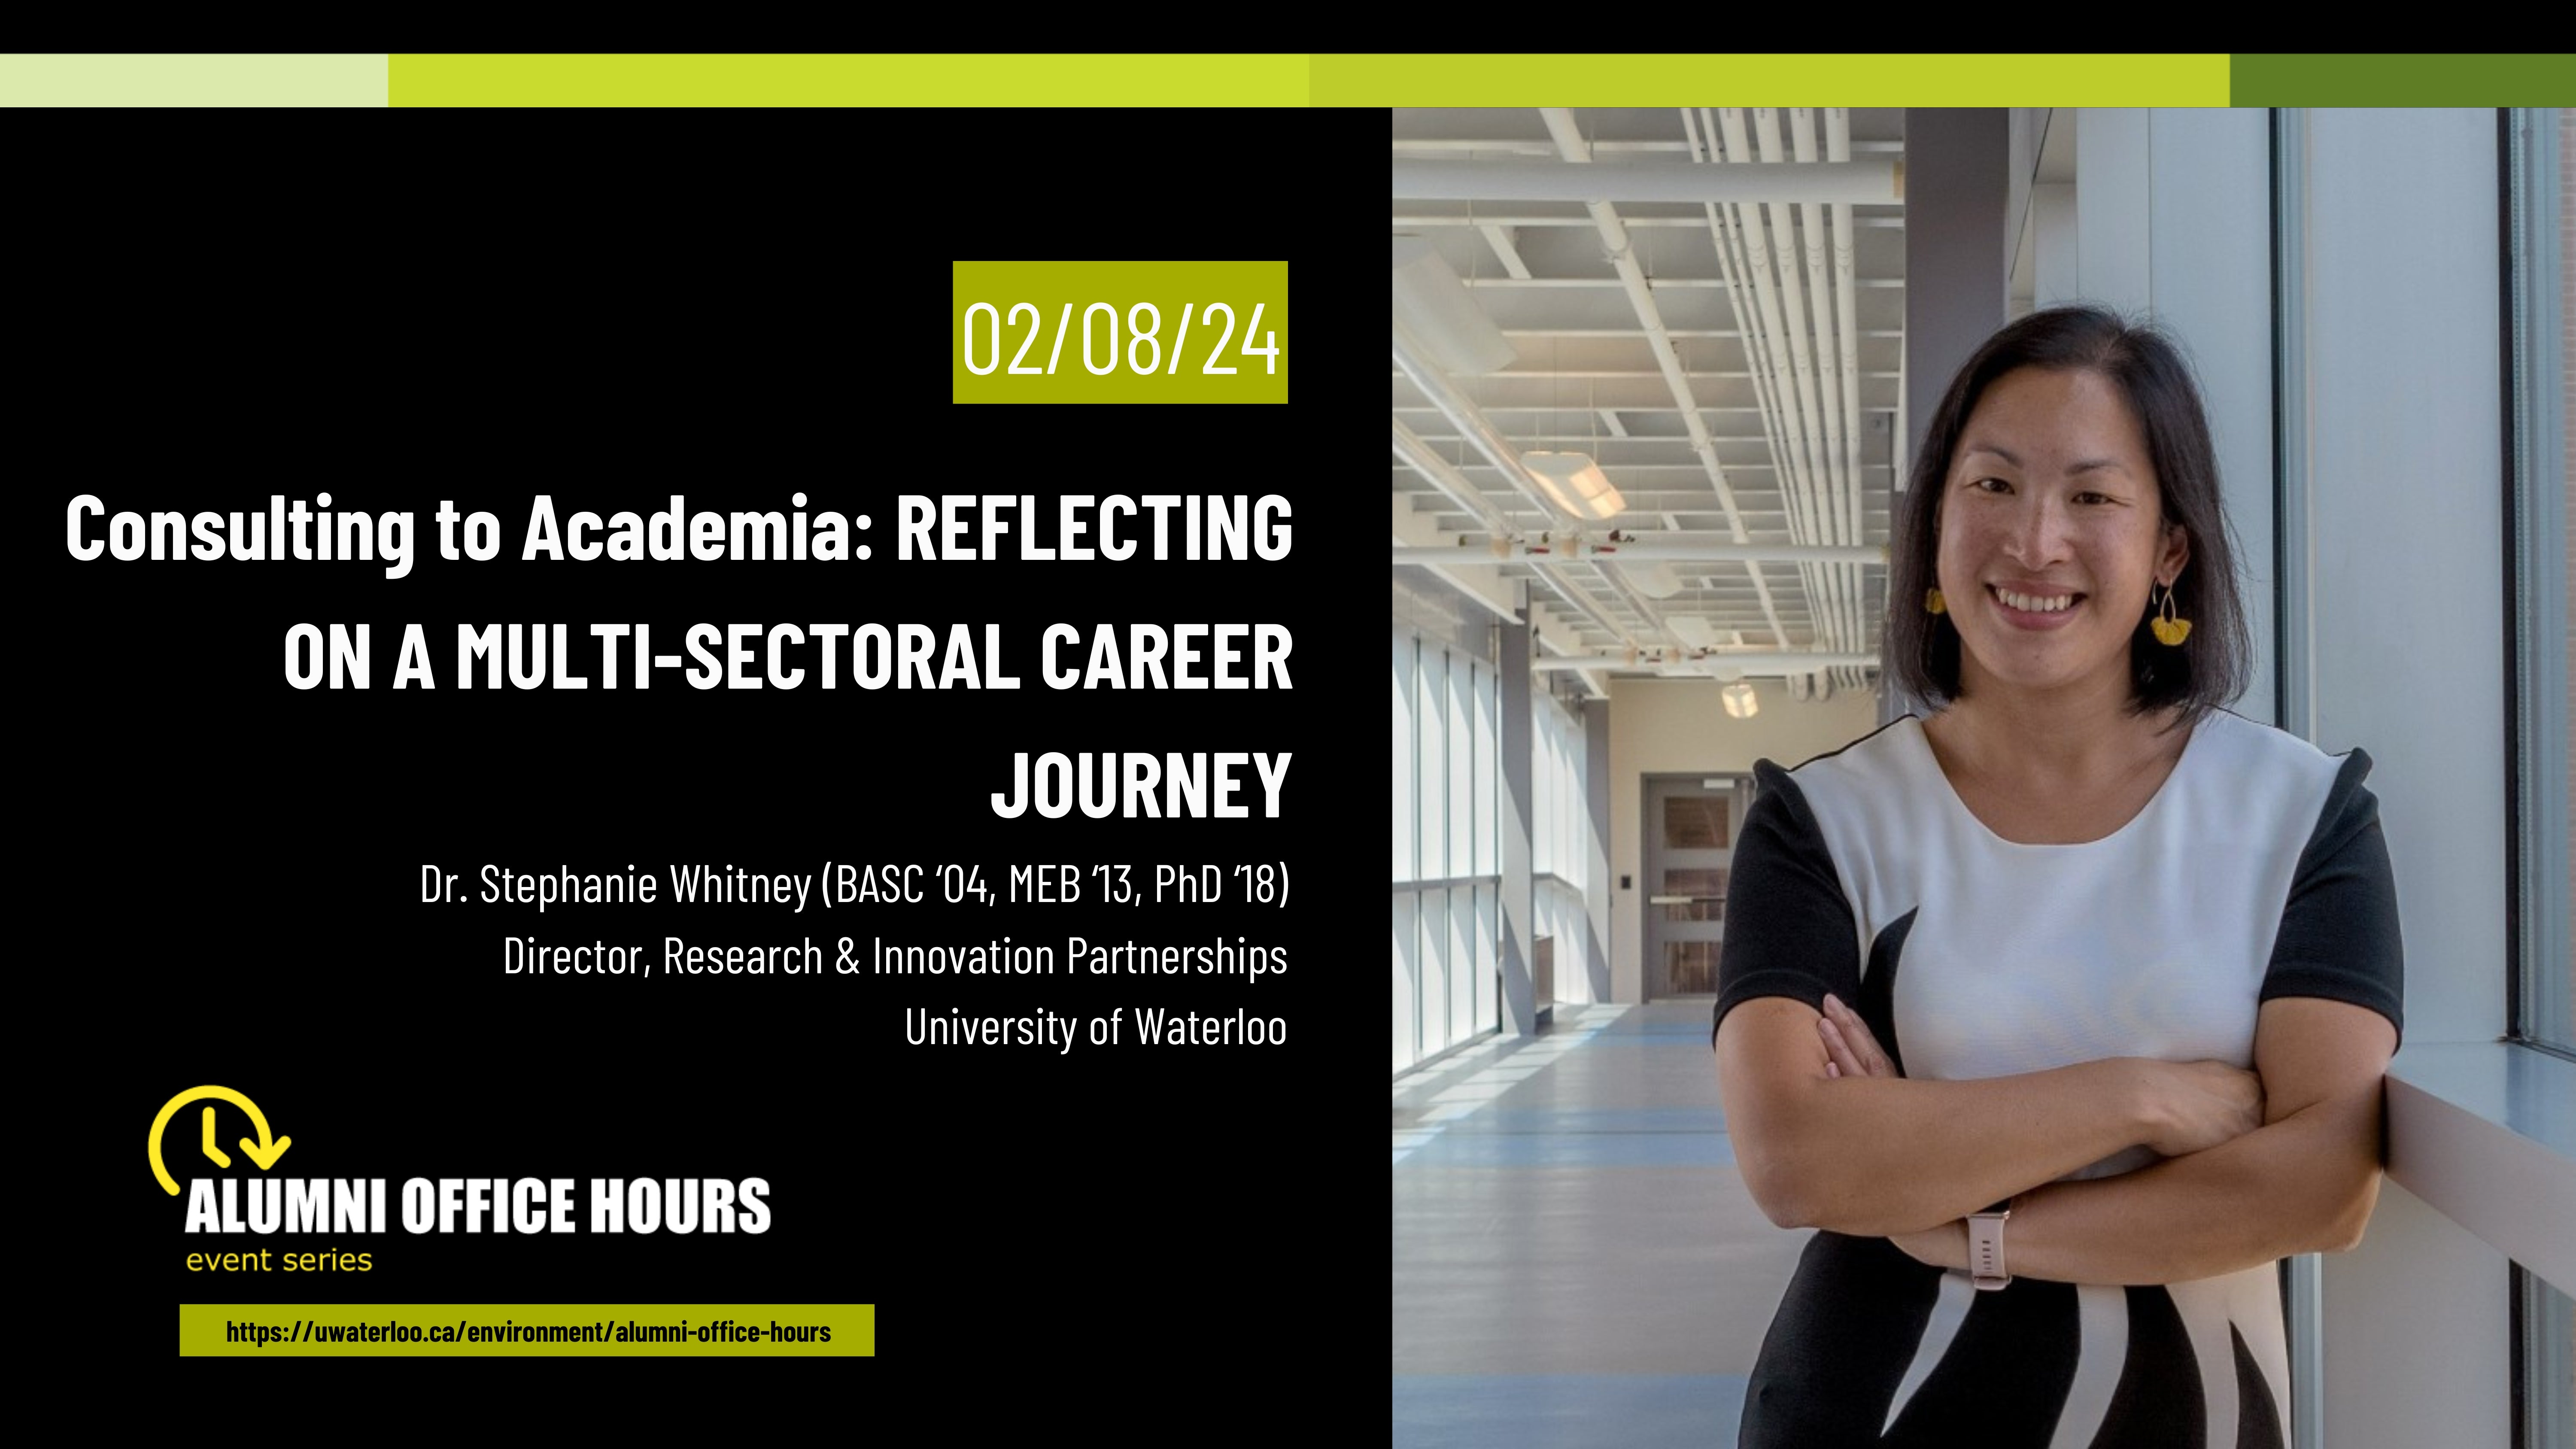 Consulting to academia: Reflecting on a multi-sectoral career journey